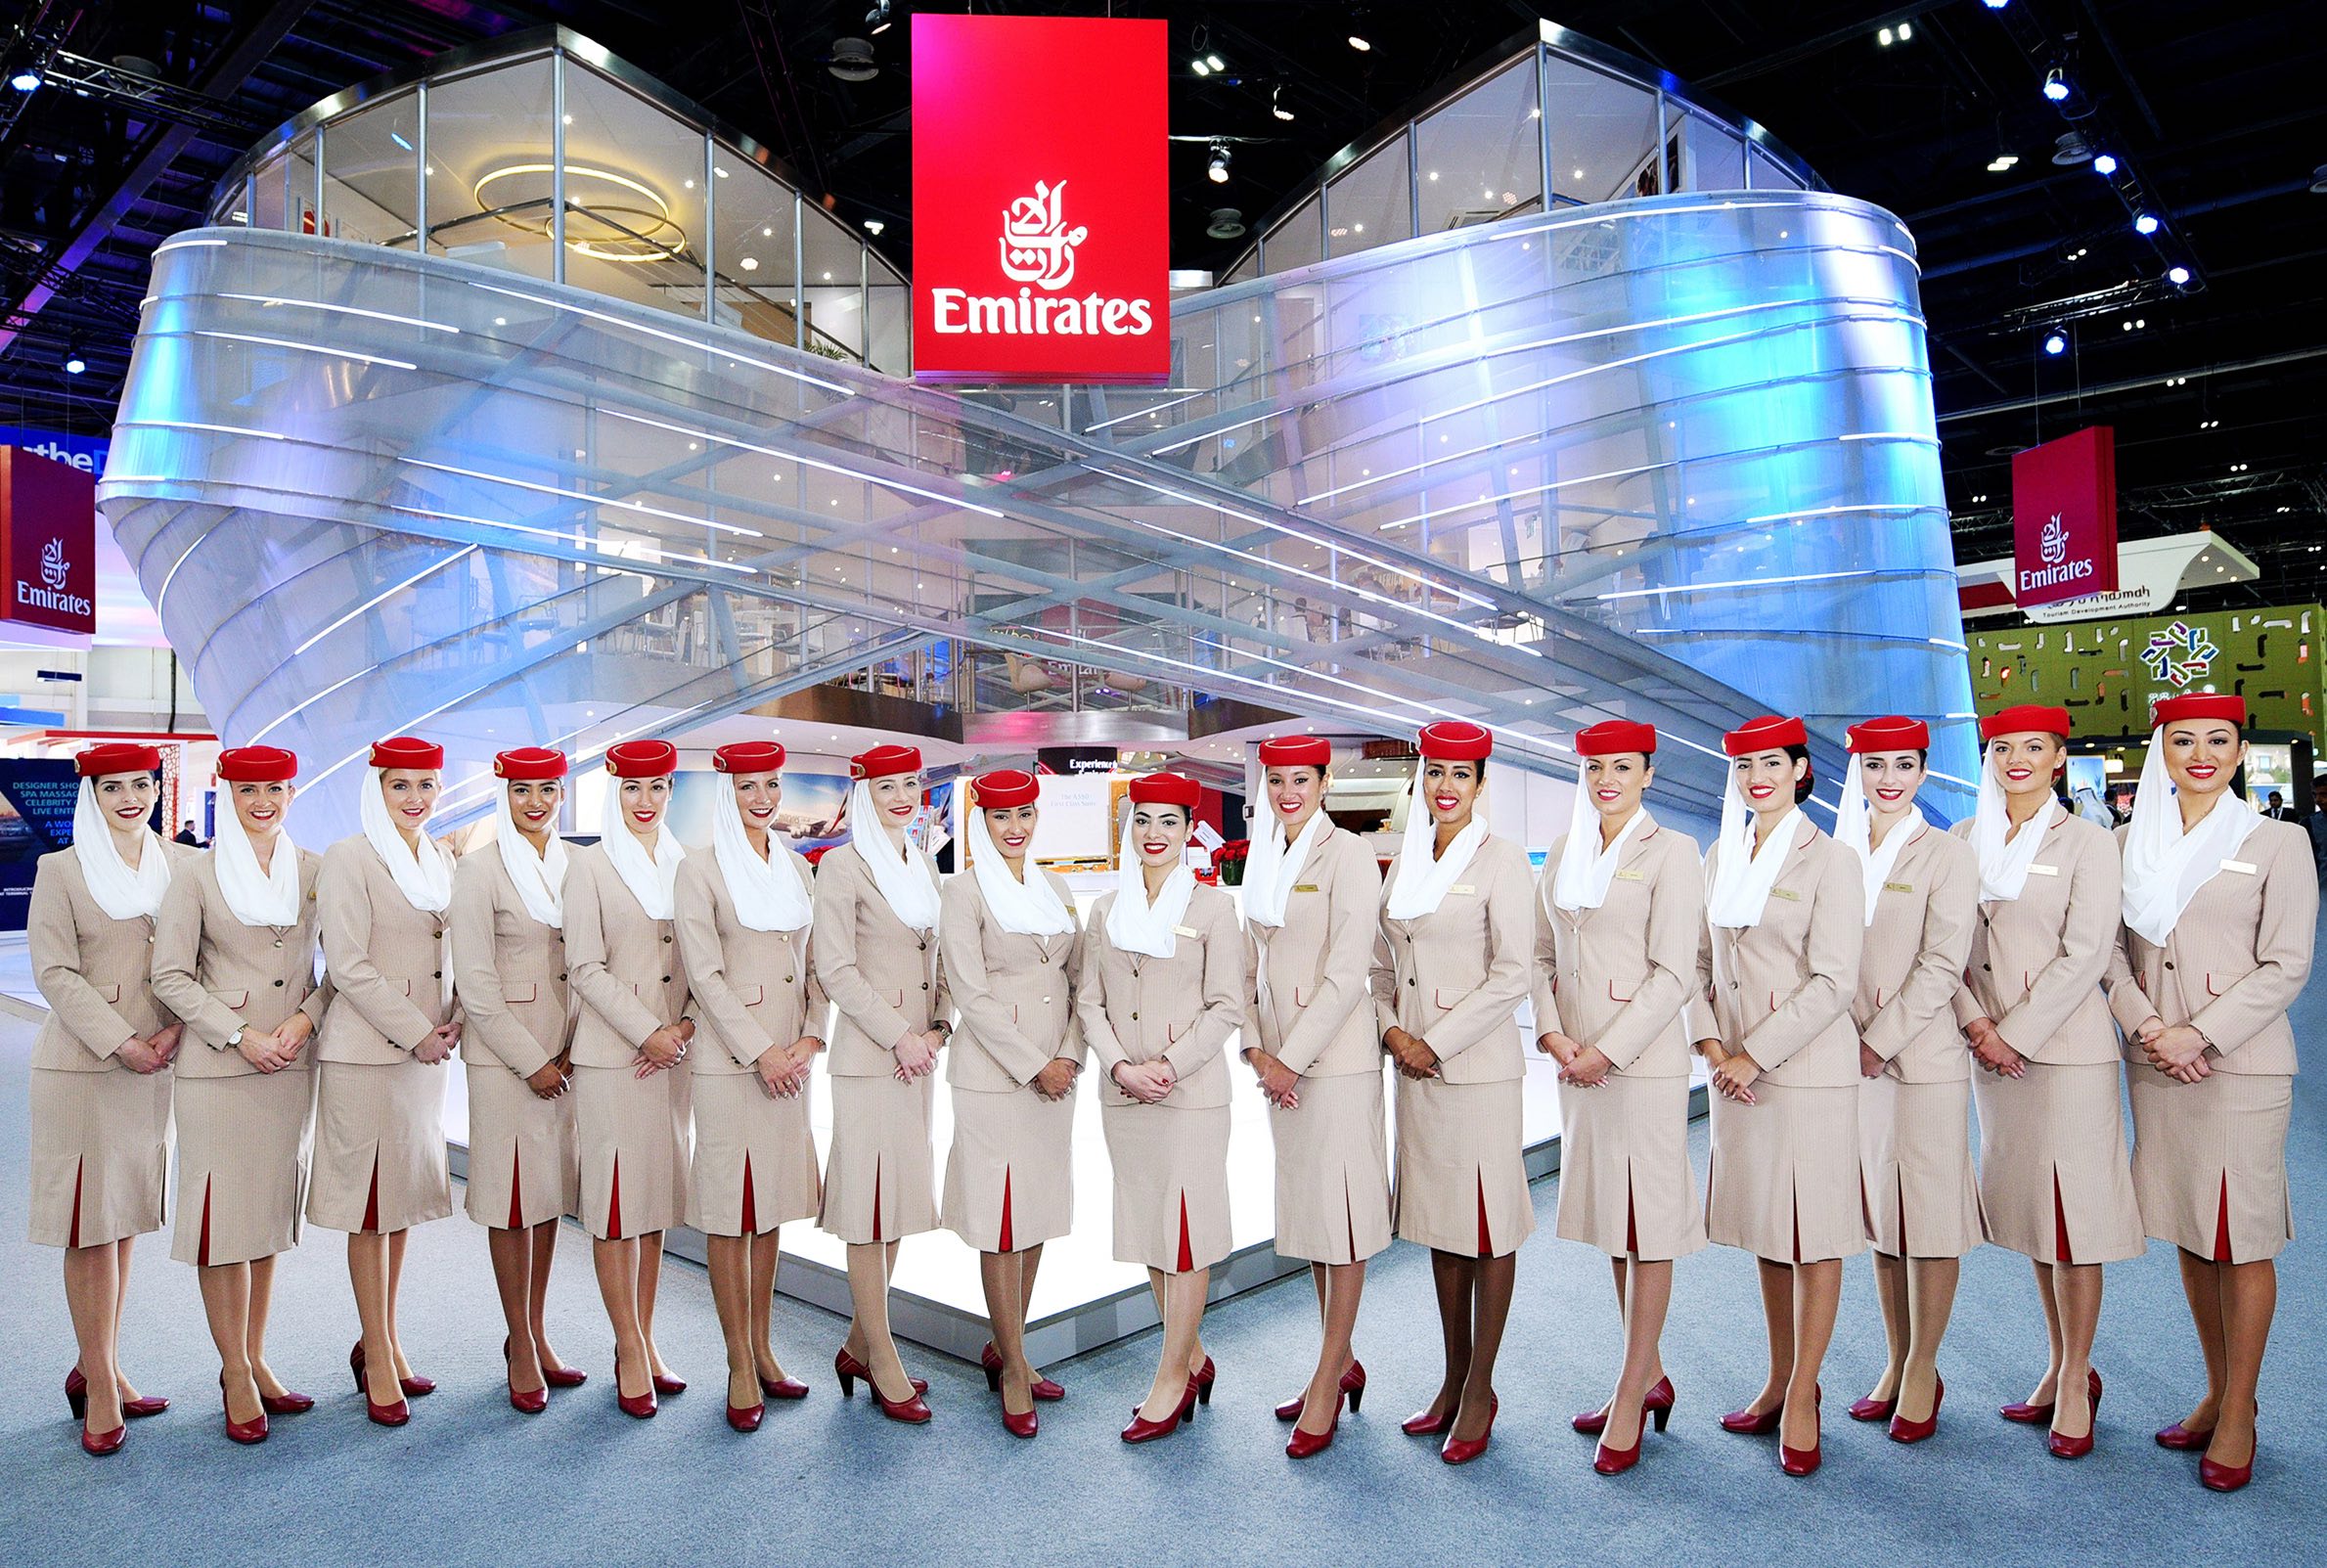 Happy 2018: Emirates Has Finally Reopened Cabin Crew Recruitment - Applications Being Accepted Now